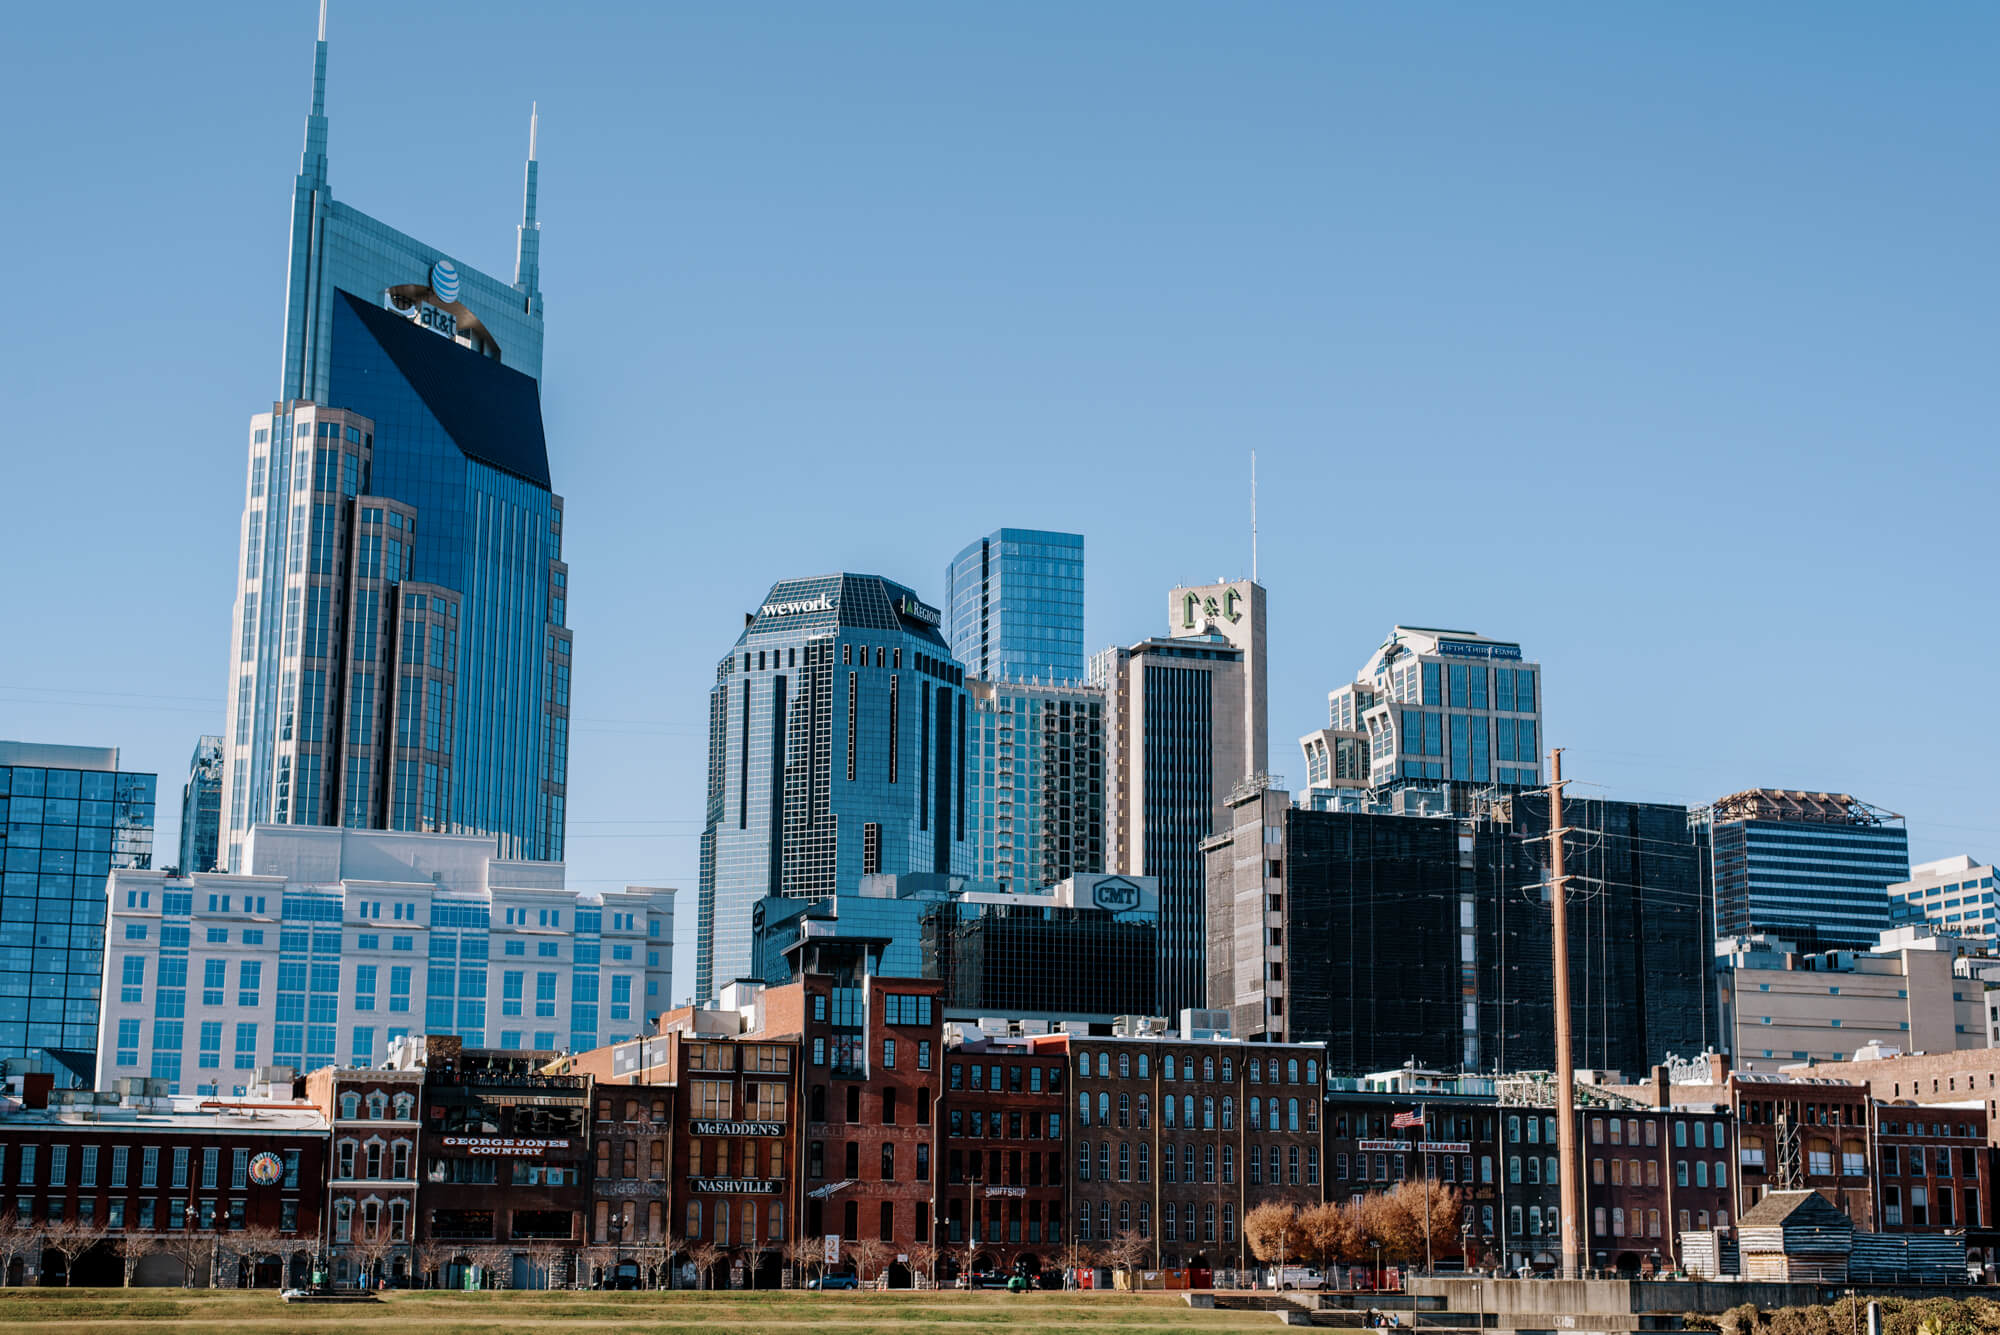 Nashville skyline from Cumberland Park featuring the AT&T tower rising above the rest on a sunny day.